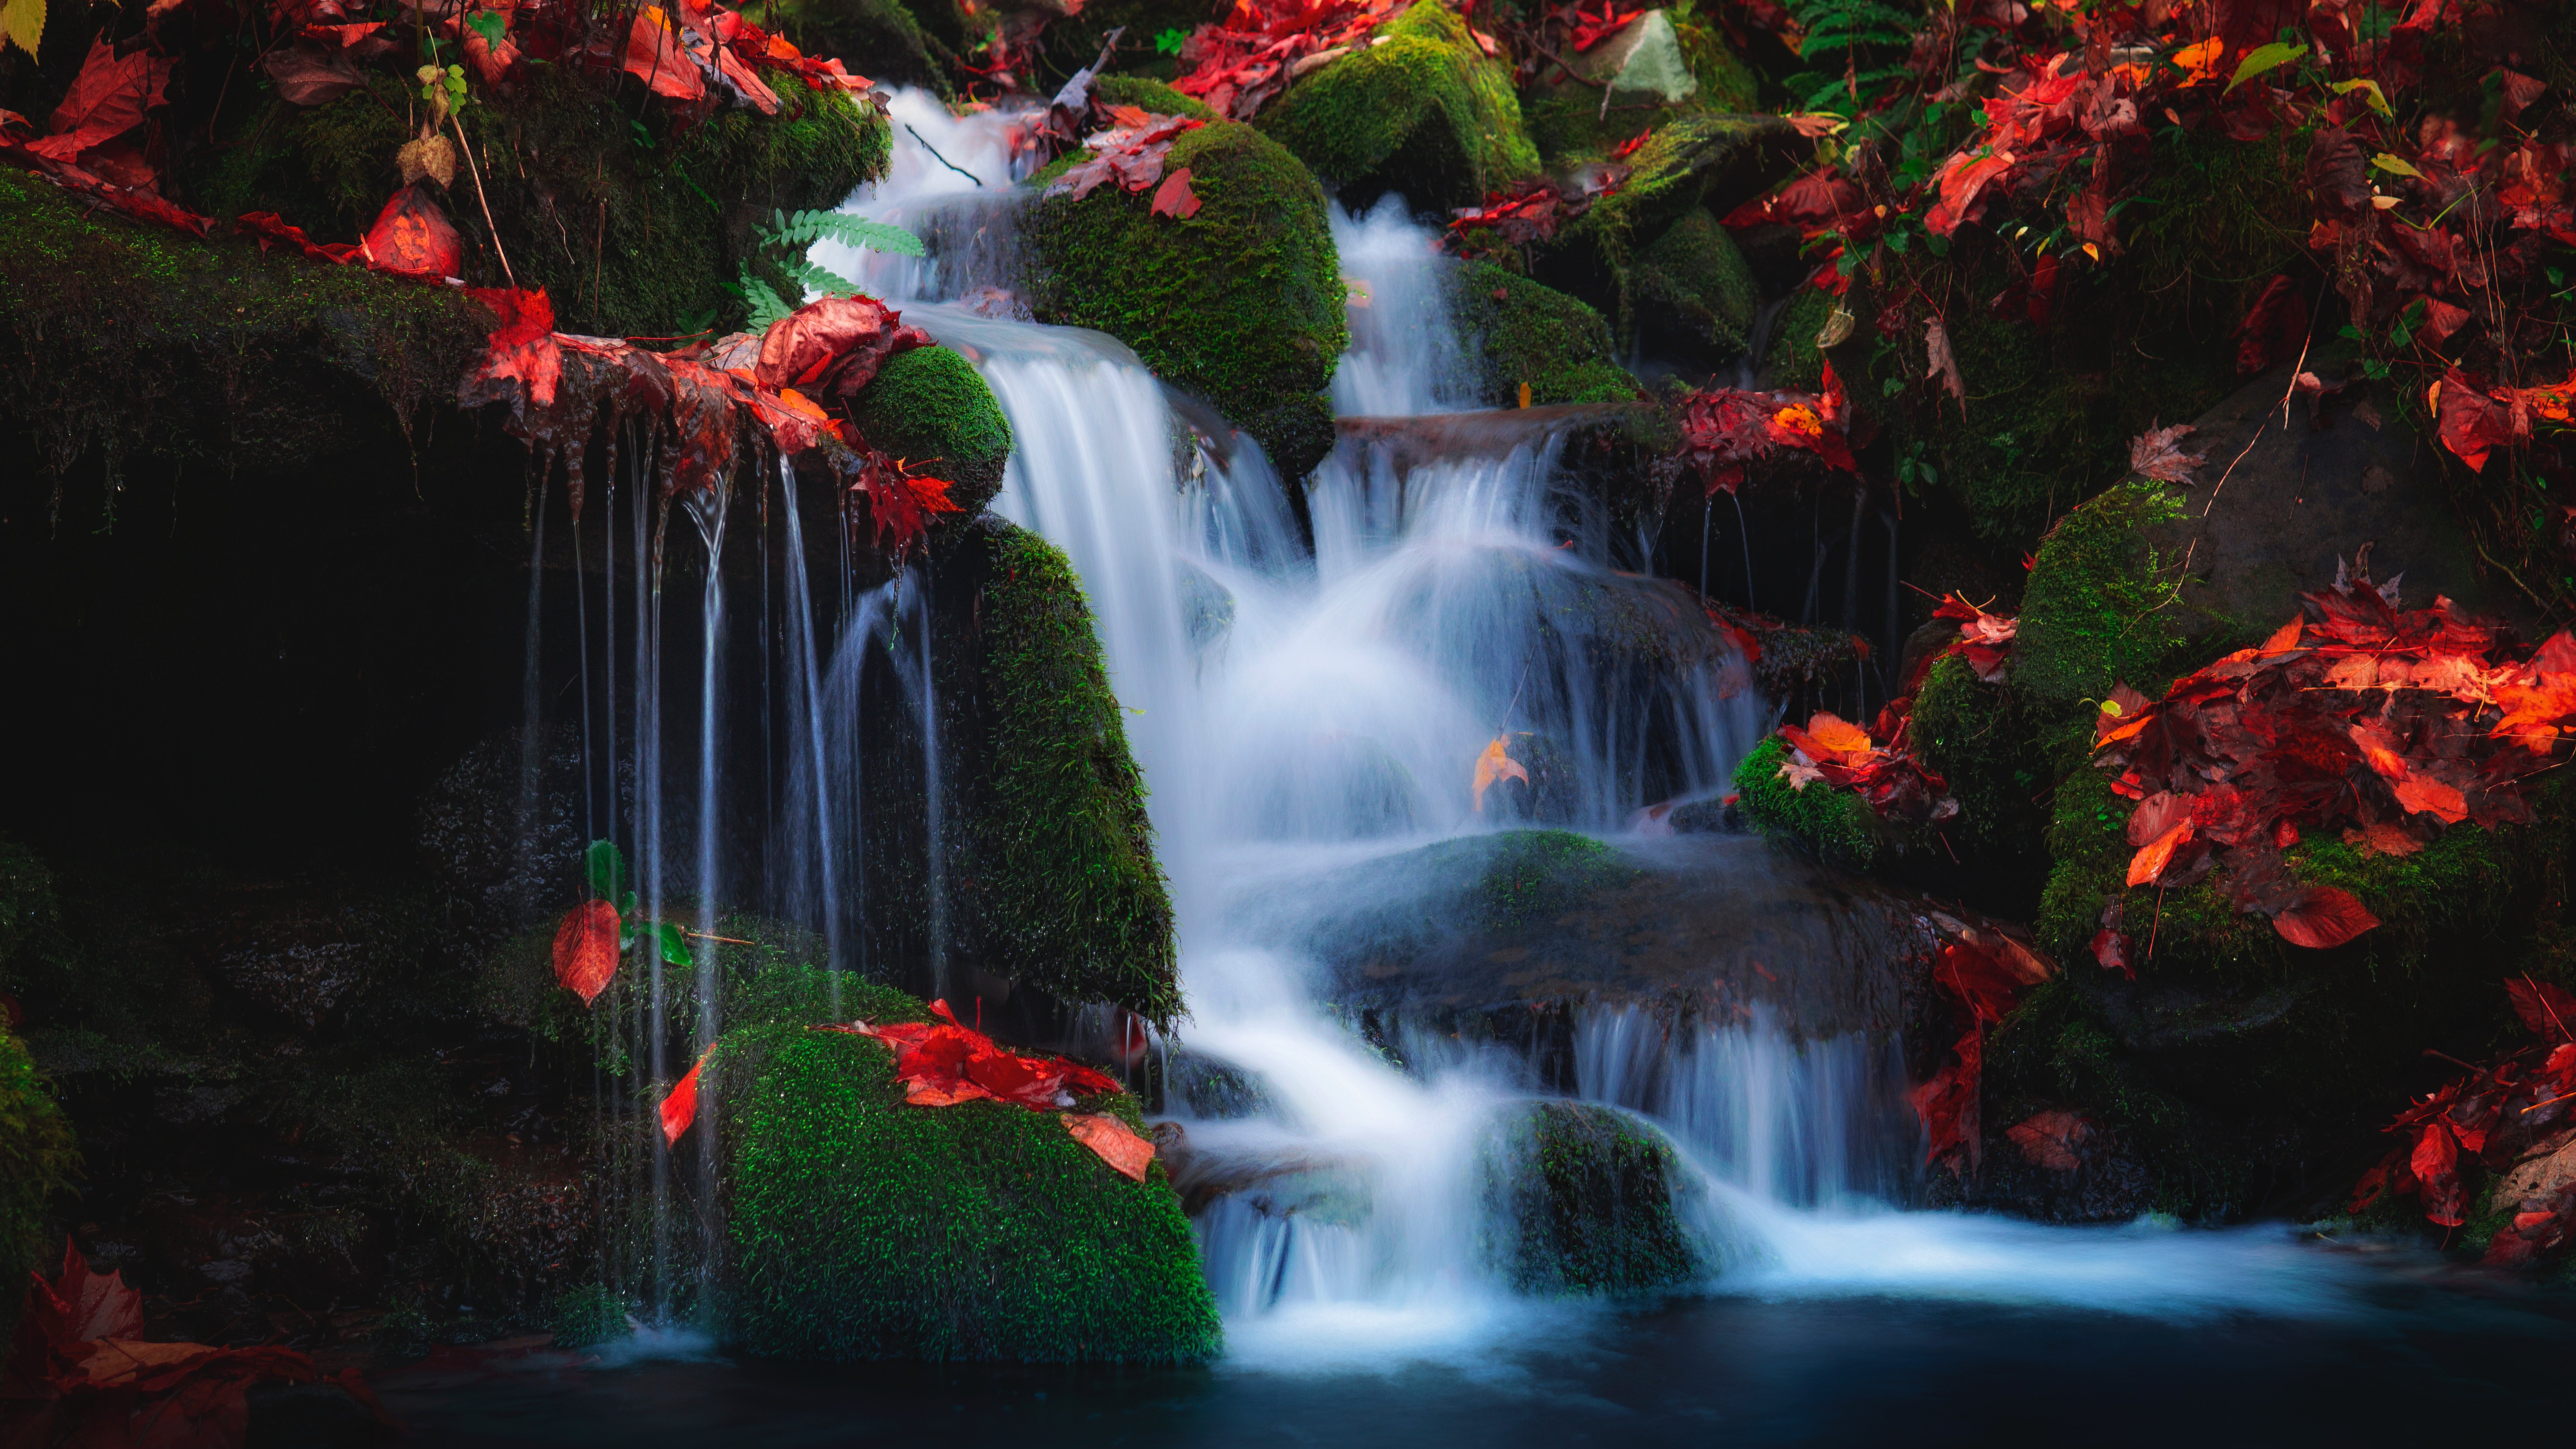 A waterfall surrounded by fallen autumn leaves.